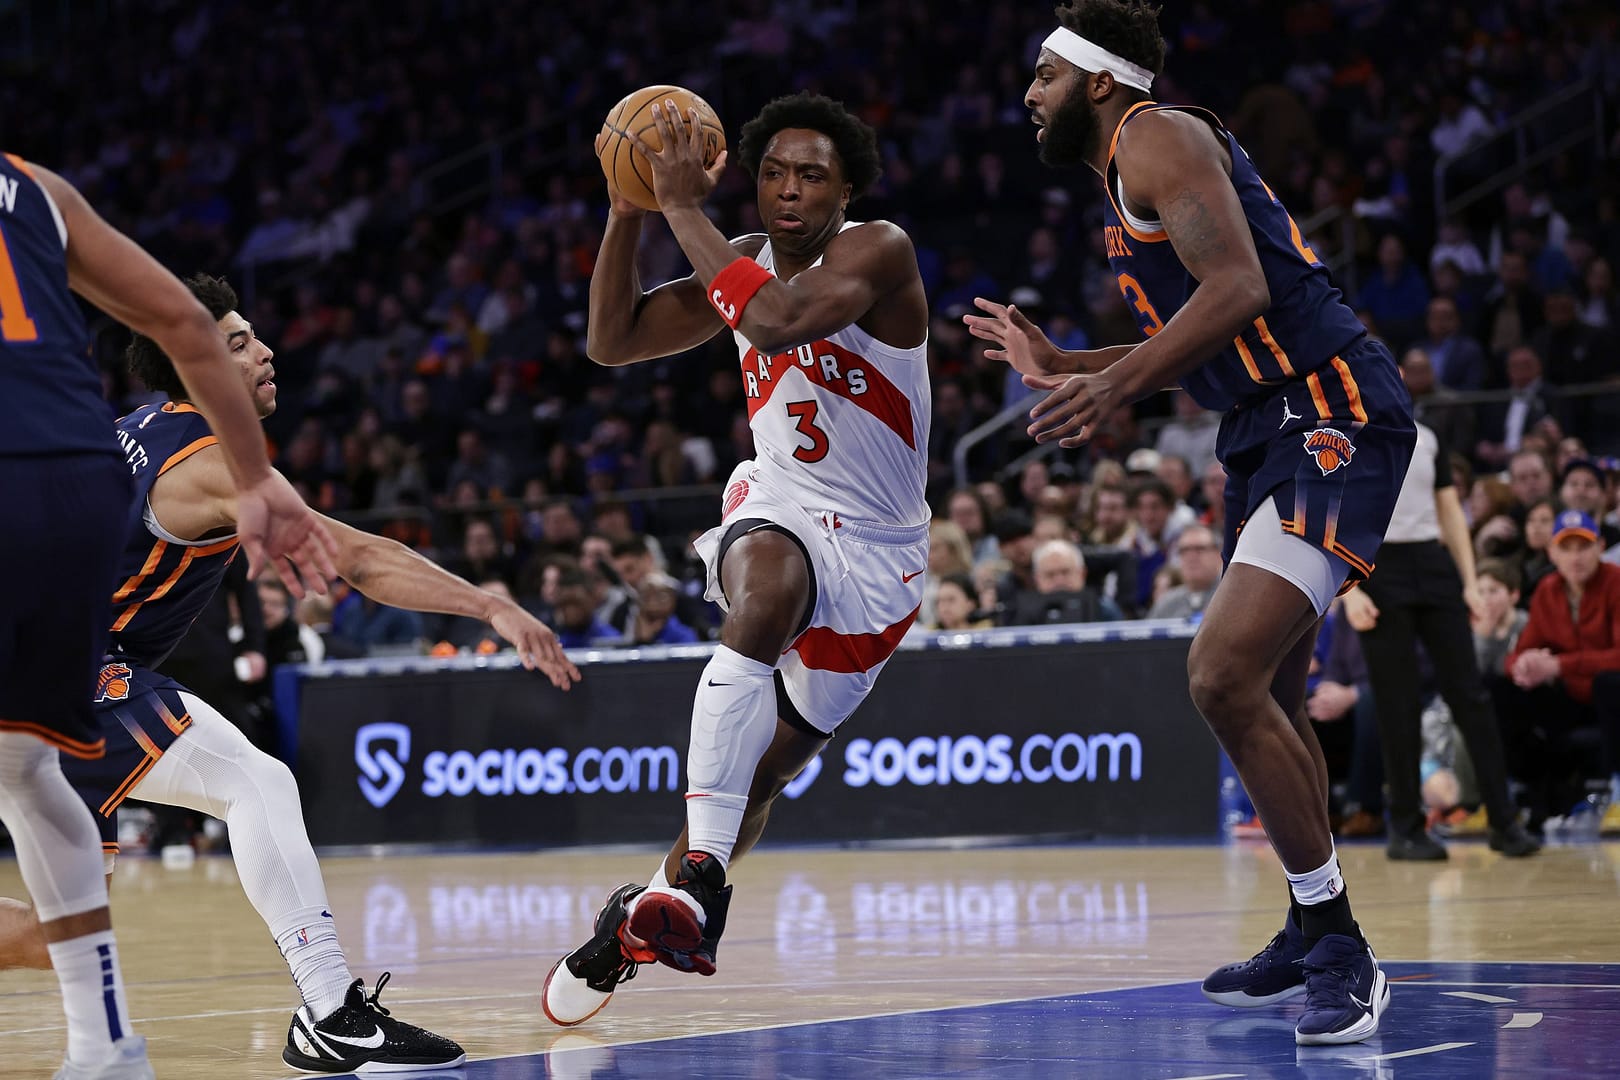 The O.G. Anunoby trade odds have been released with rumors beginning to swirl ahead of next week's NBA Trade Deadline